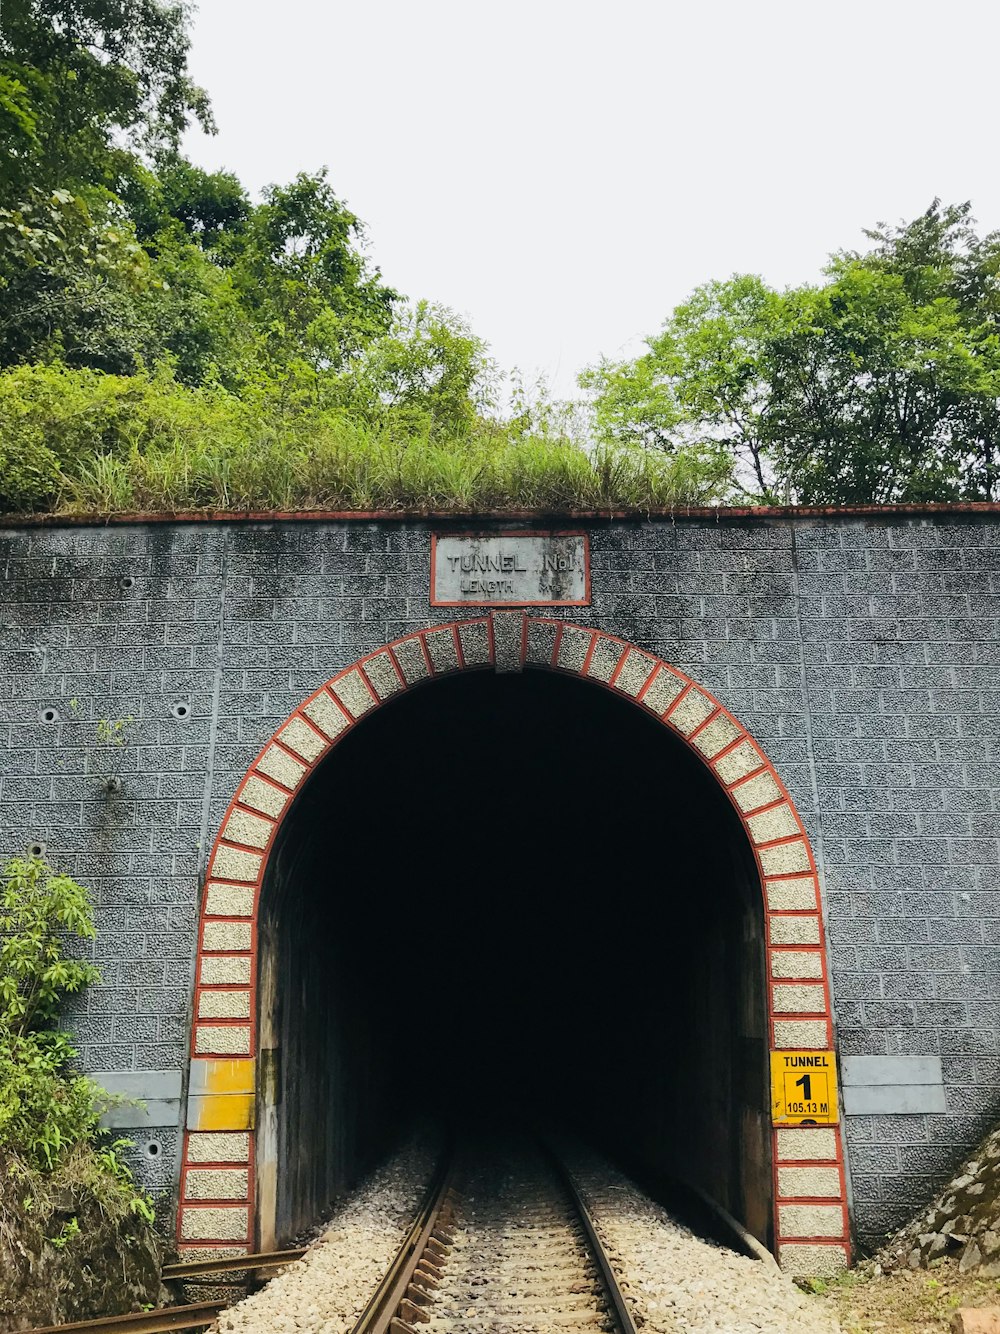 grey concrete tunnel during daytime